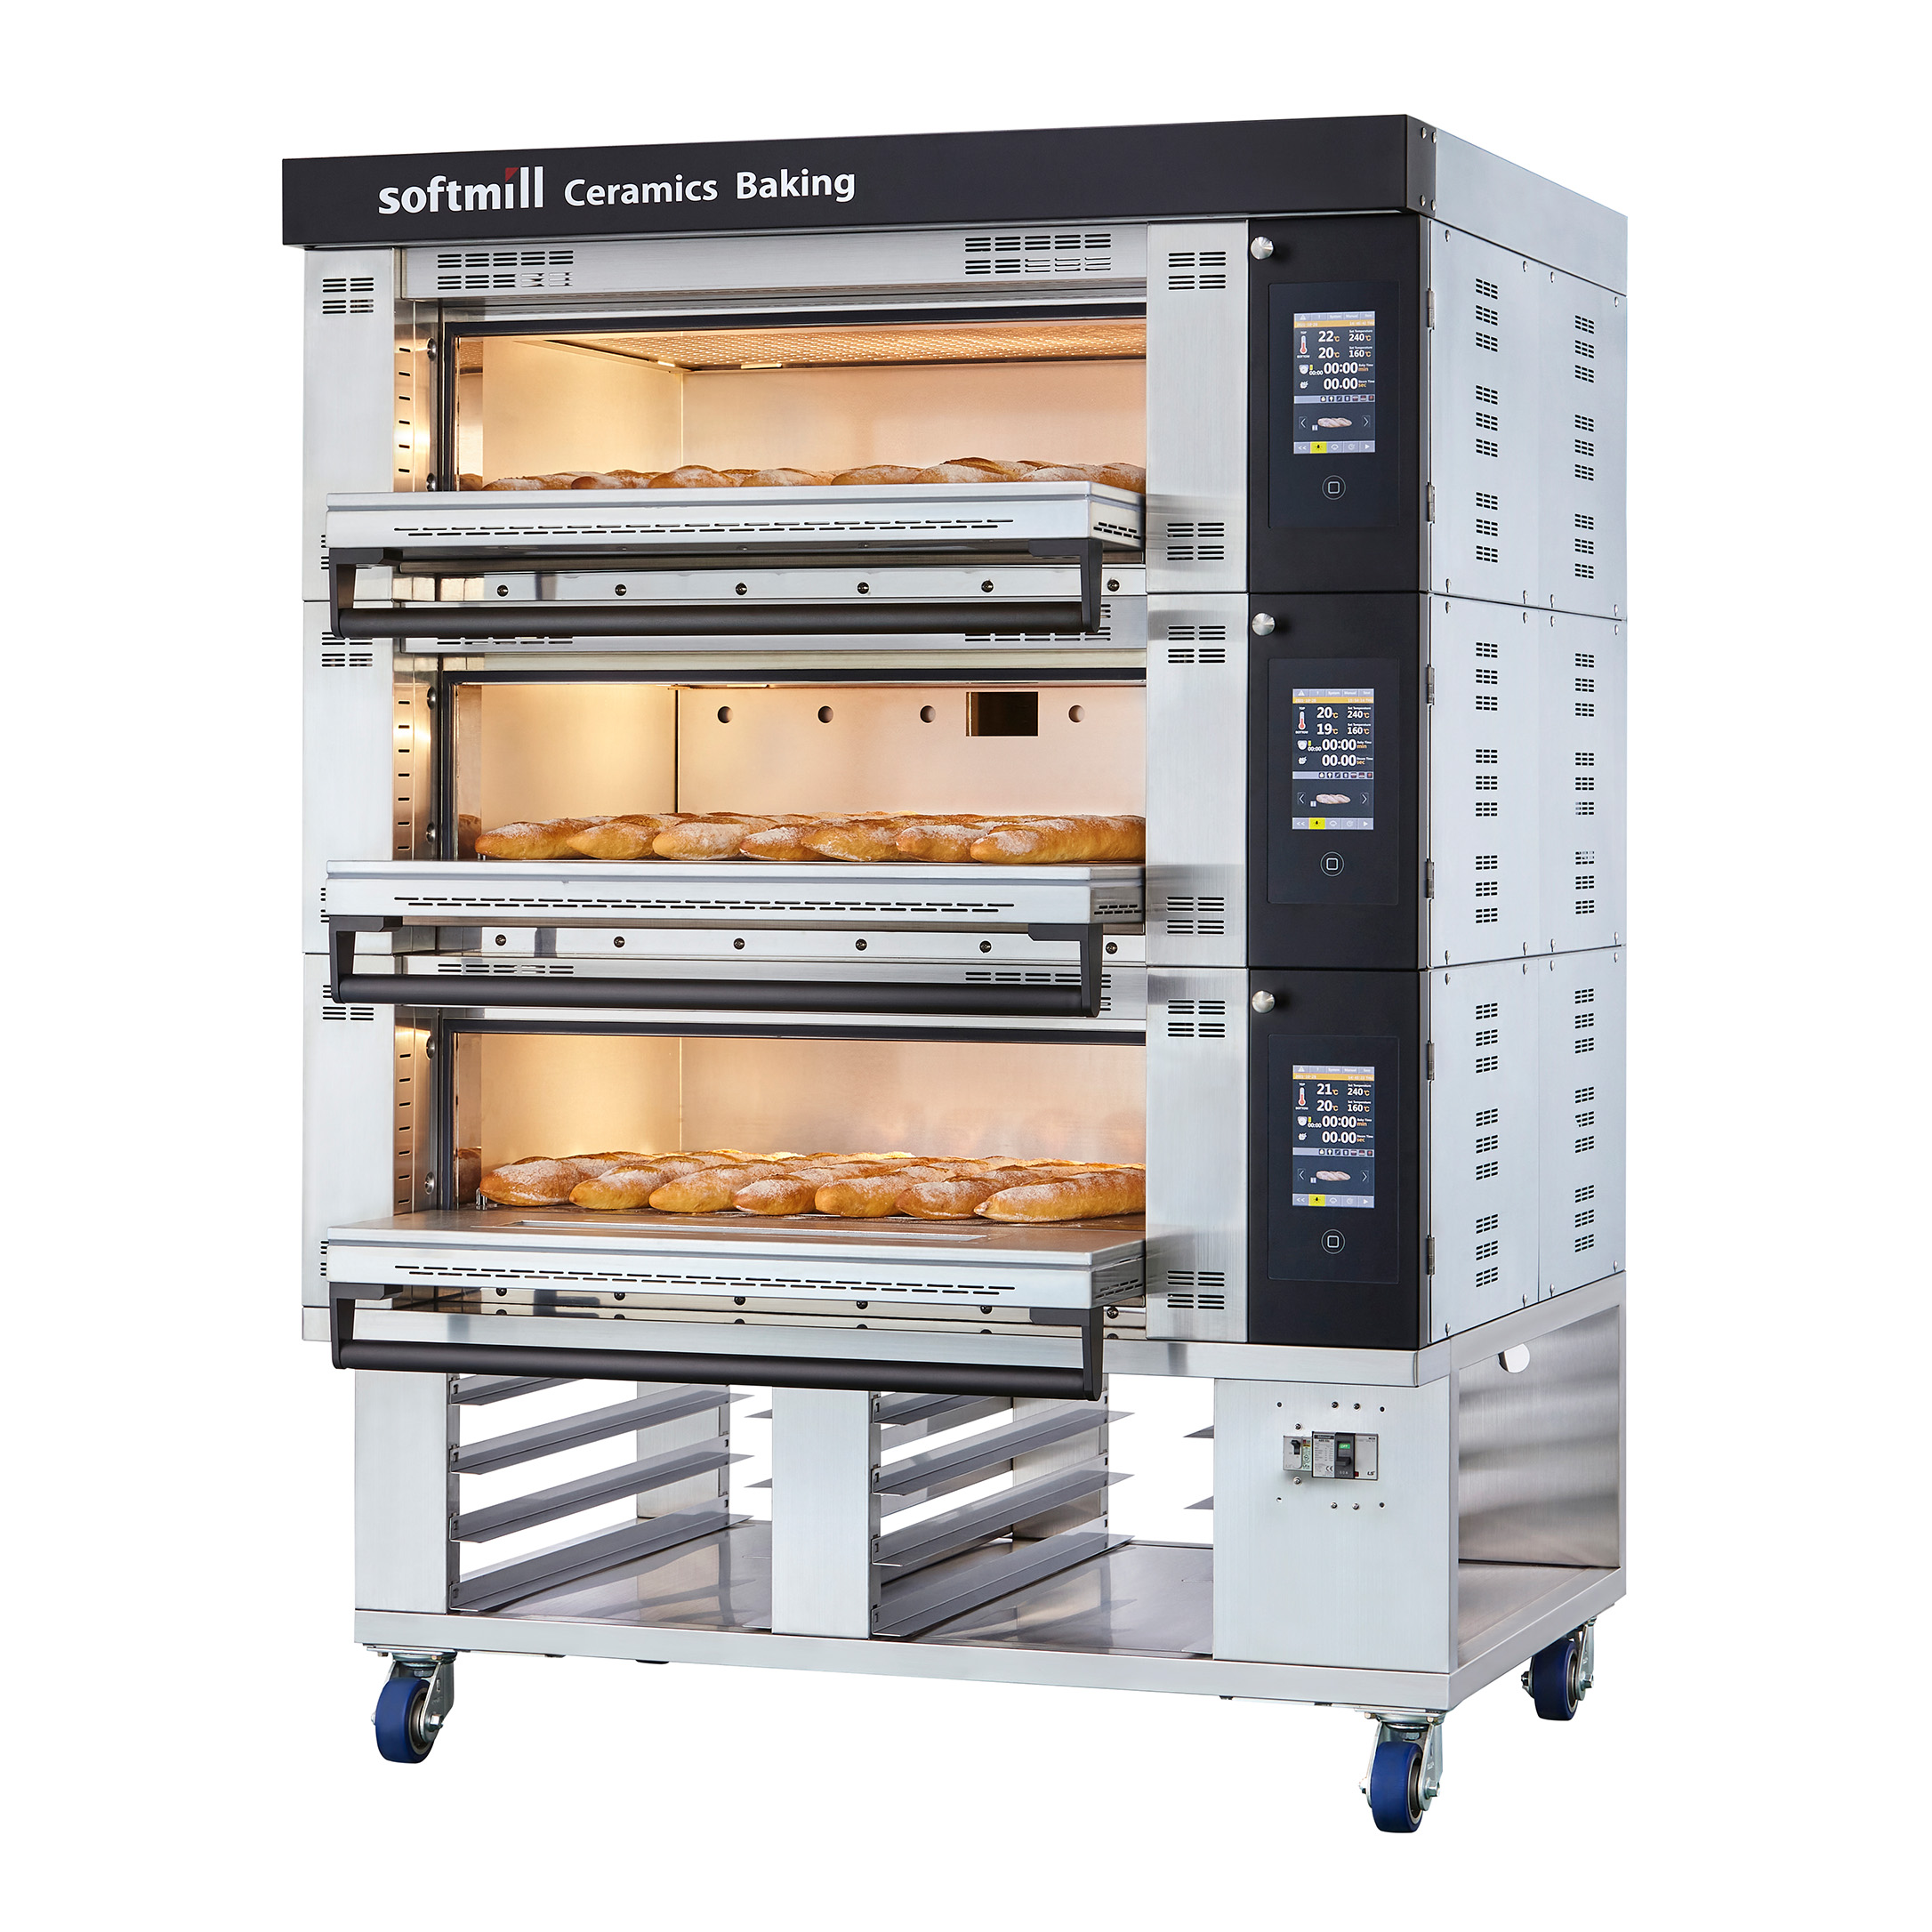 Convergence Oven 2 trays 3 tiers detail mini size images